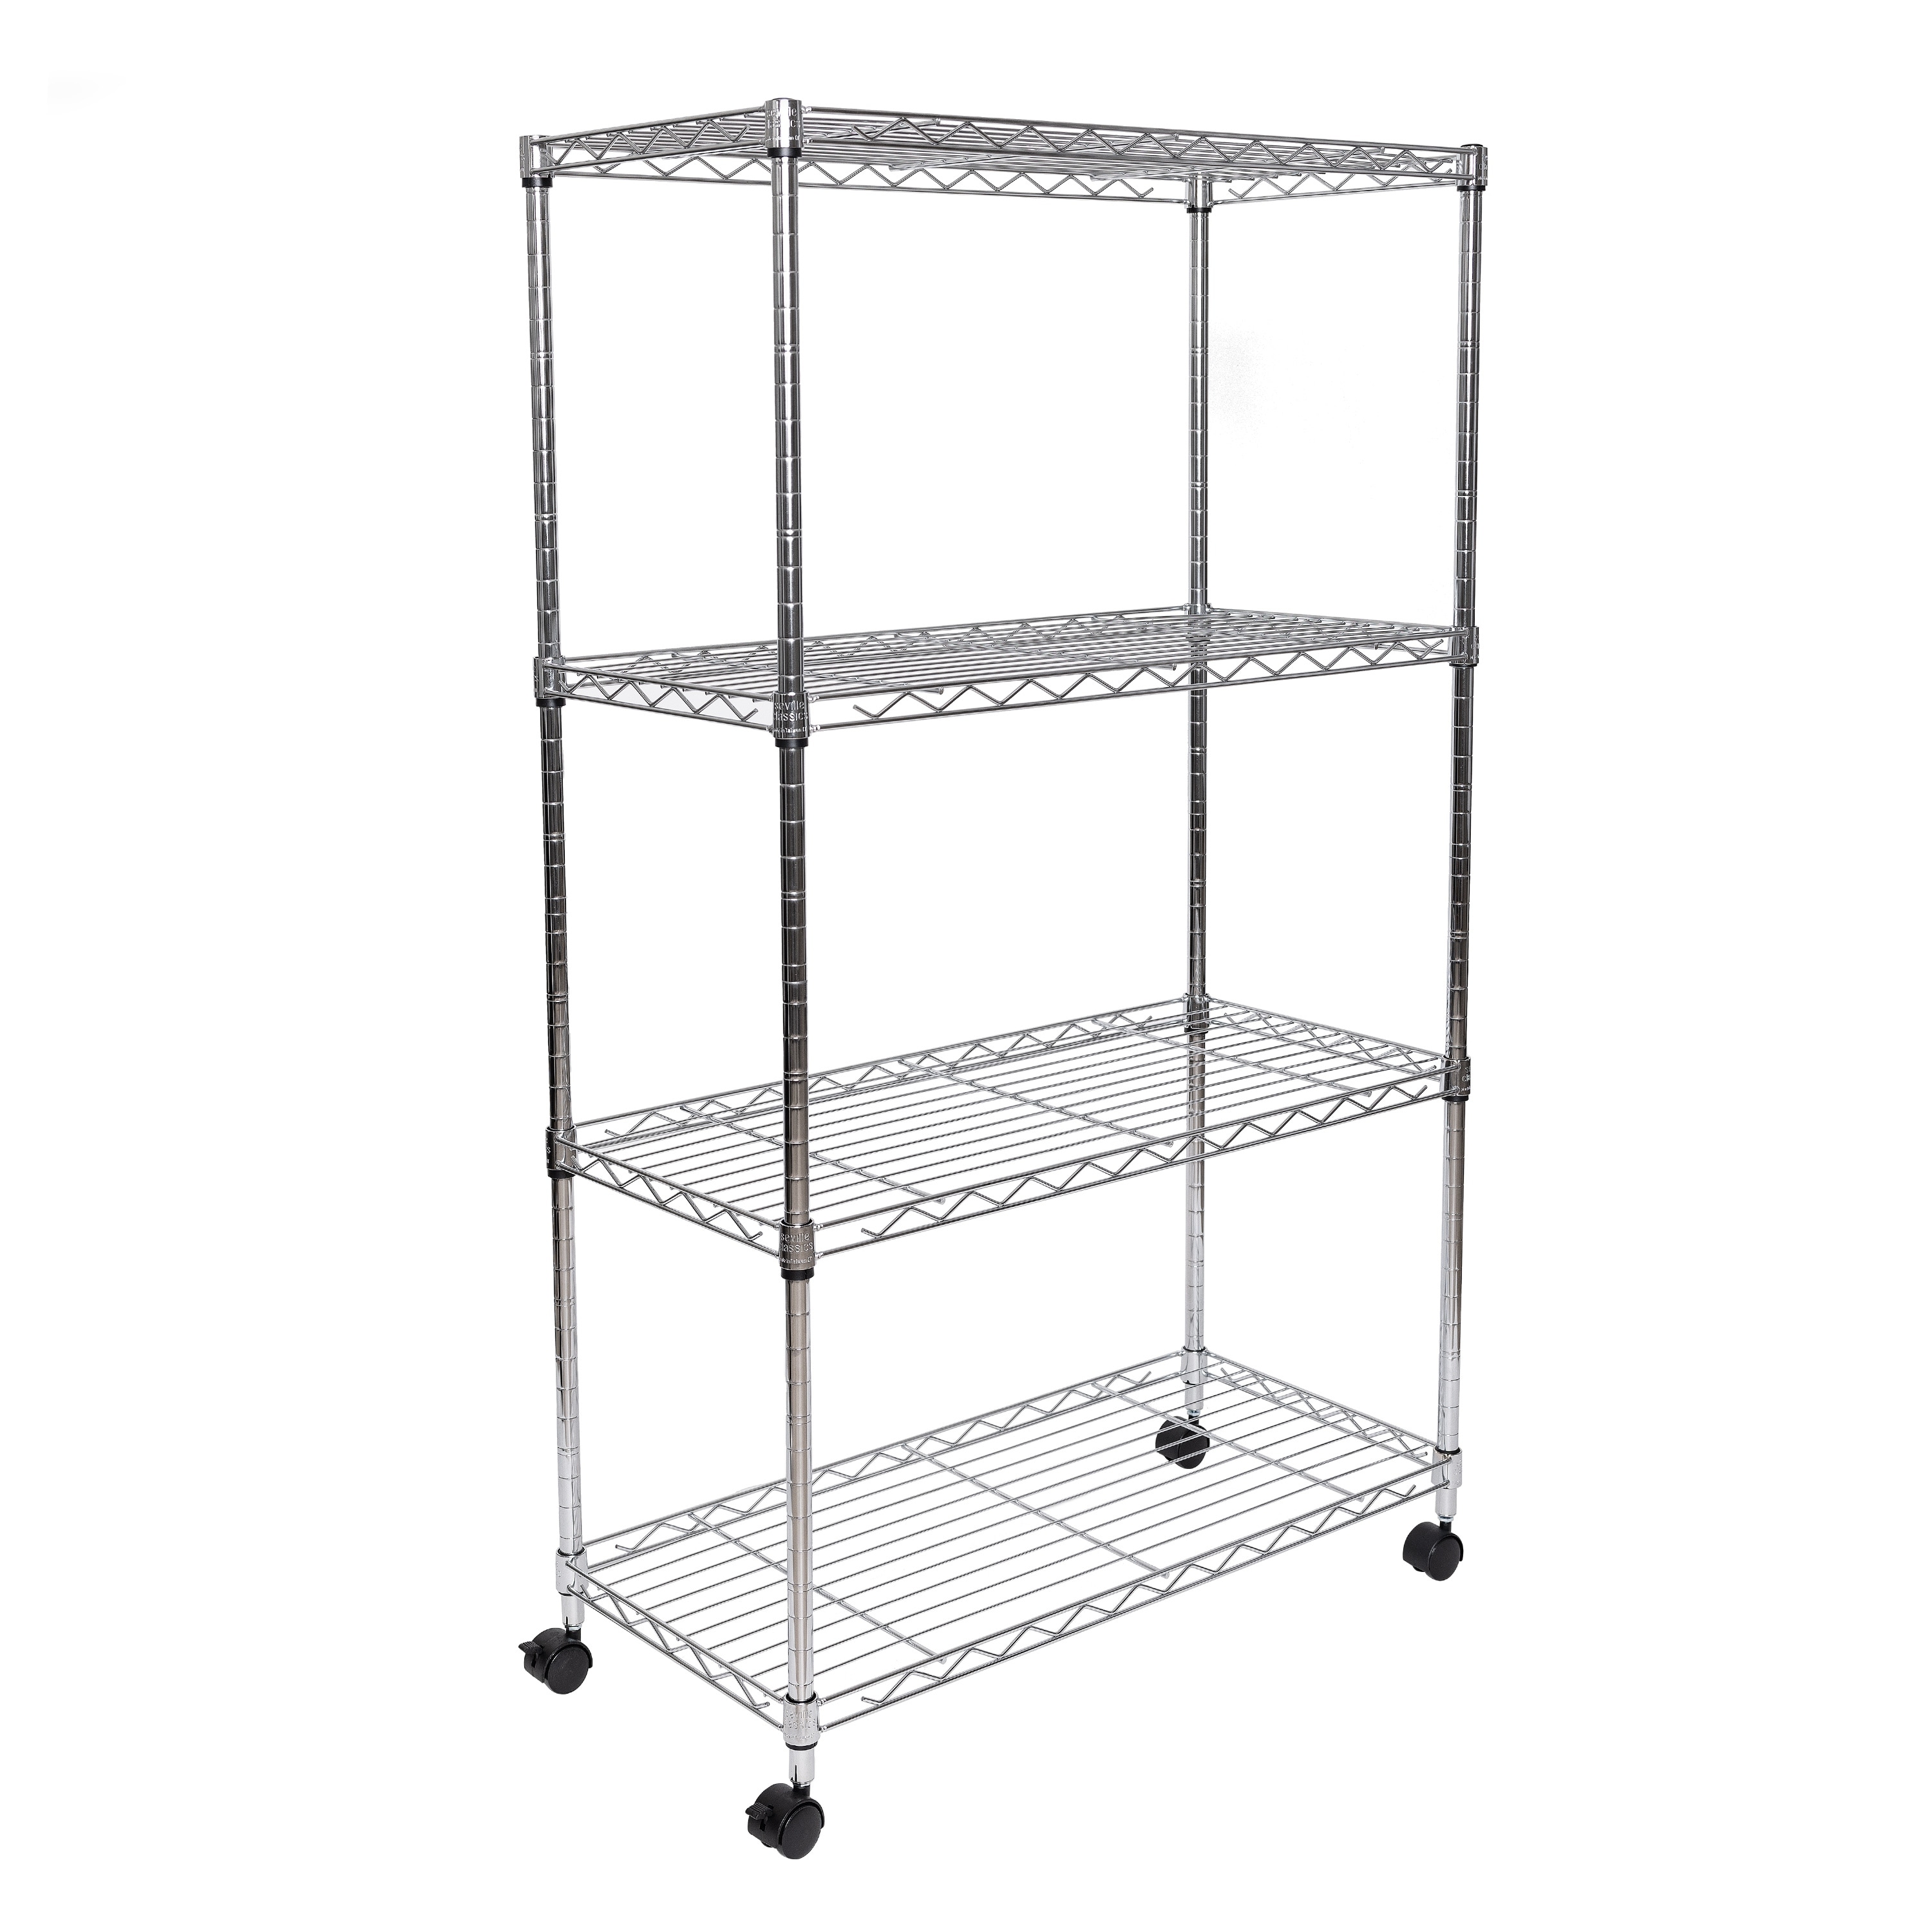 https://ak1.ostkcdn.com/images/products/is/images/direct/b00ccdad30a754467f7ef53ee1b1539f25c9bd82/Seville-Classics-4-Tier-Steel-Wire-Shelving-with-Wheels%2C-30%22-W-x-14%22-D-x-48%22-H.jpg